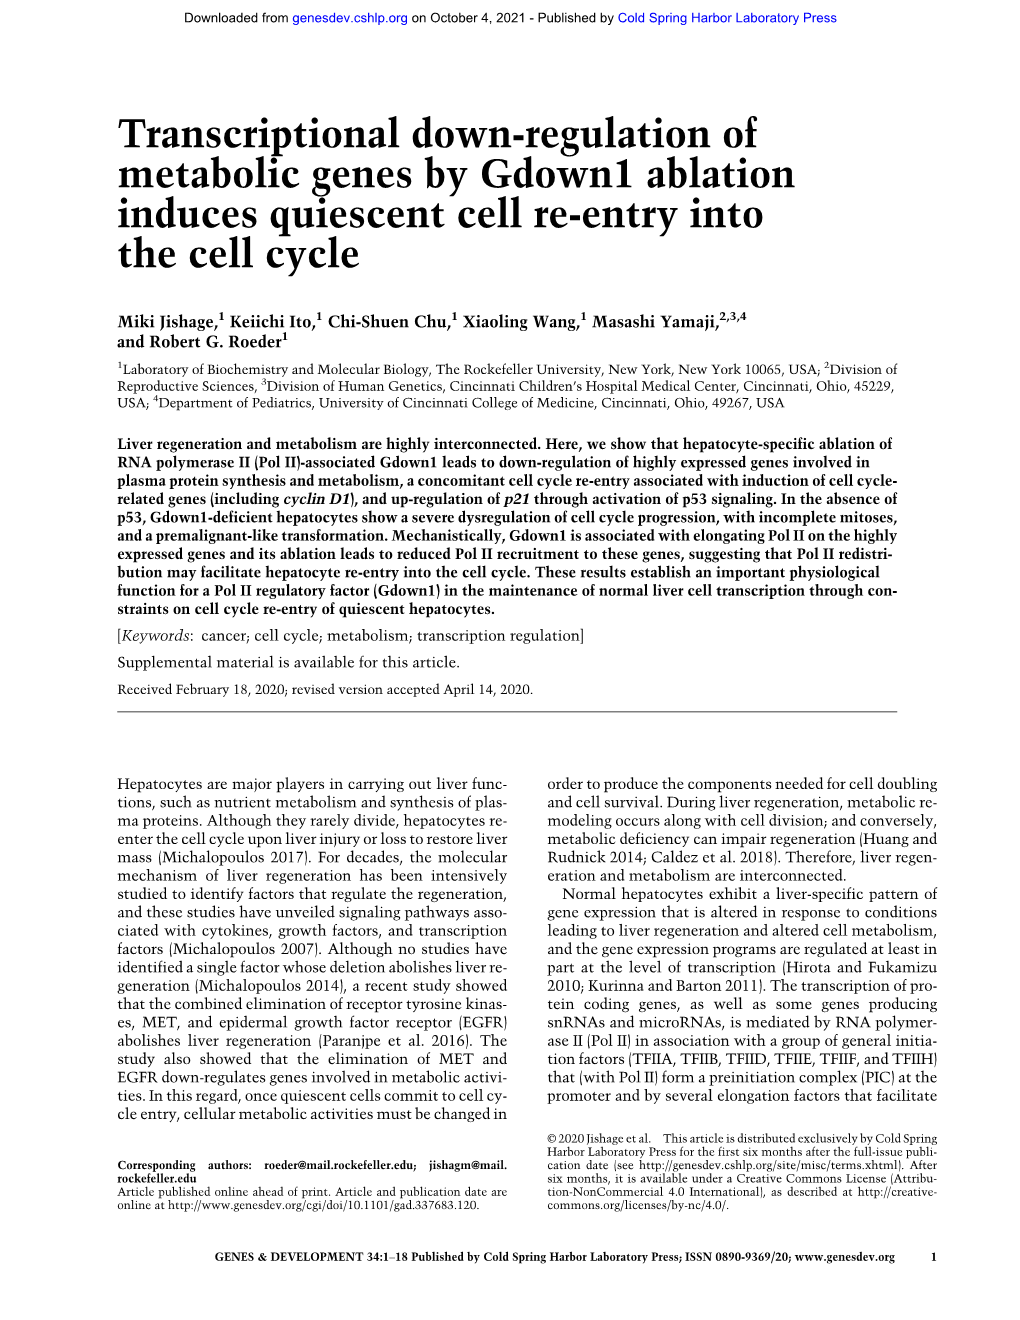 Transcriptional Down-Regulation of Metabolic Genes by Gdown1 Ablation Induces Quiescent Cell Re-Entry Into the Cell Cycle